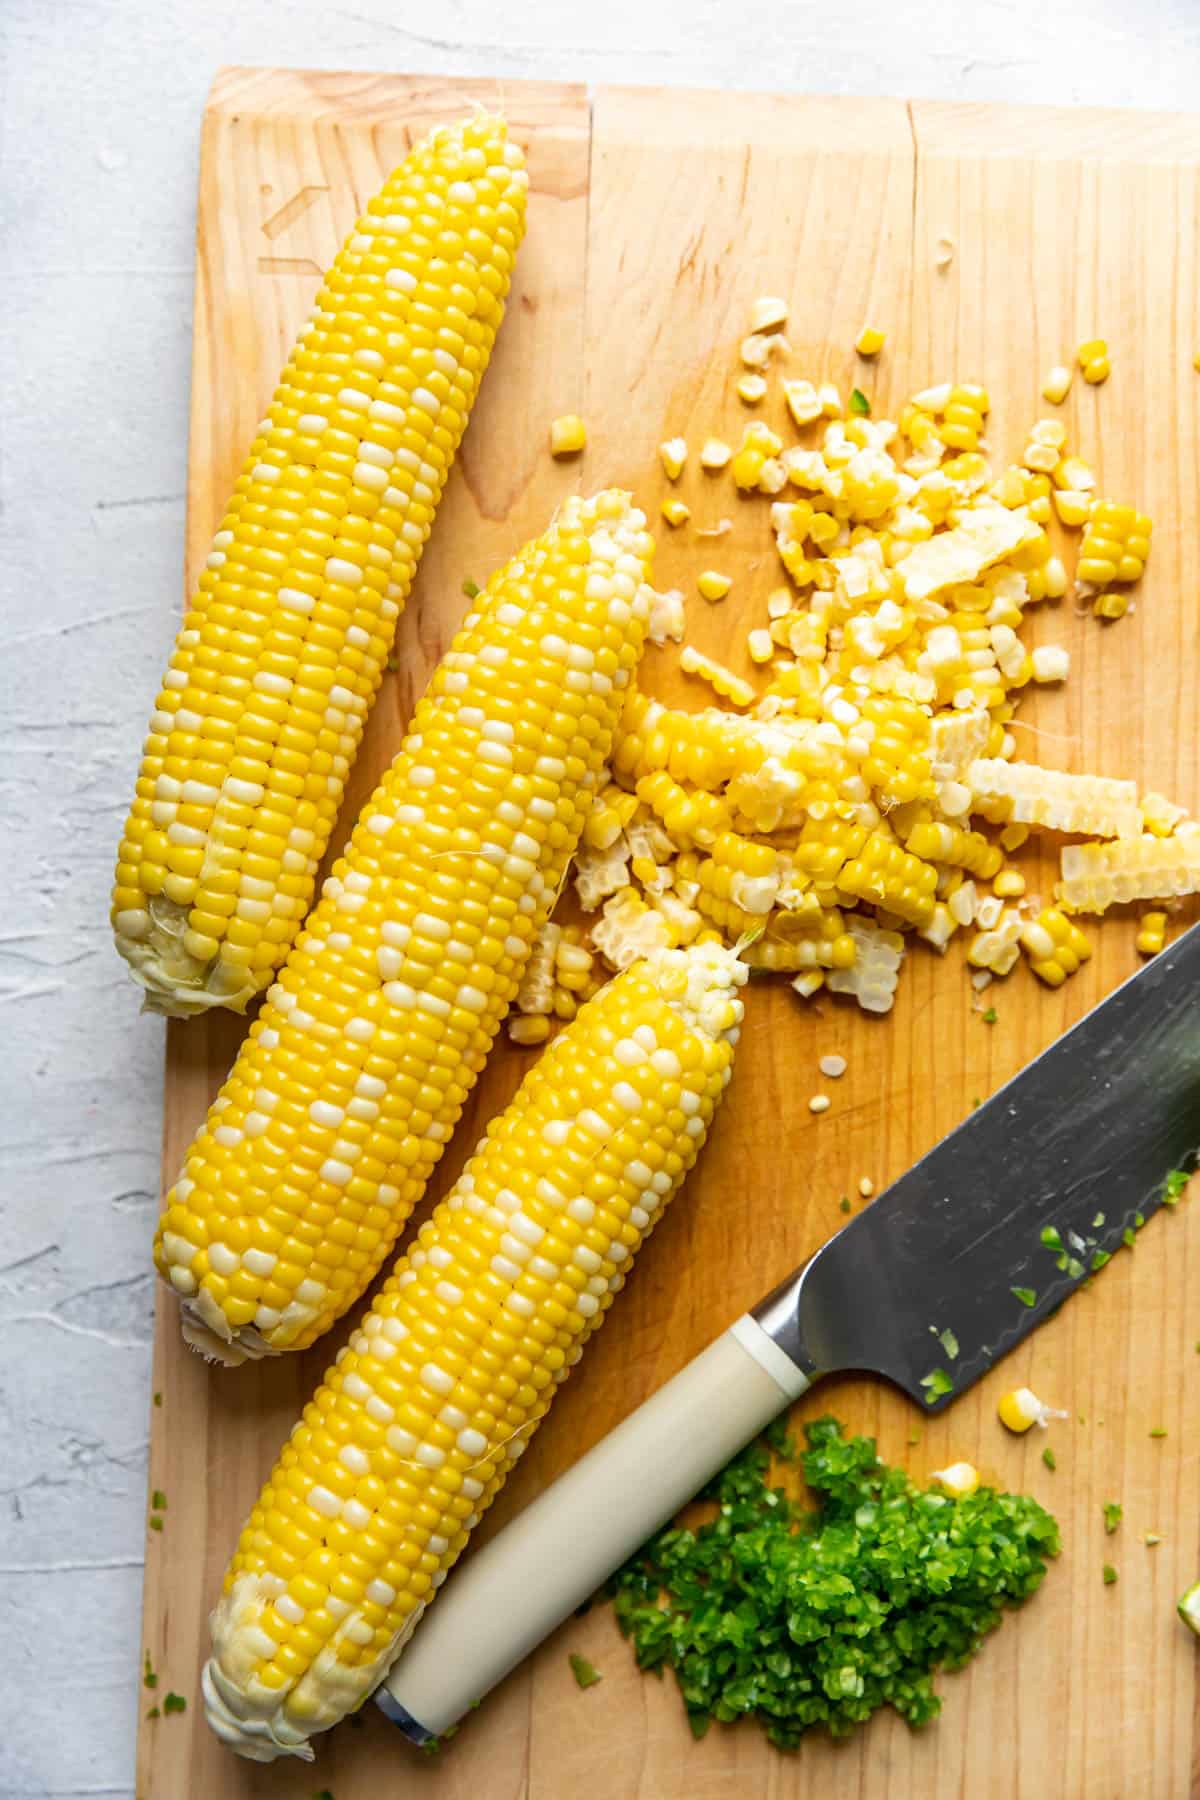 cutting off kernels from corn on the cob.